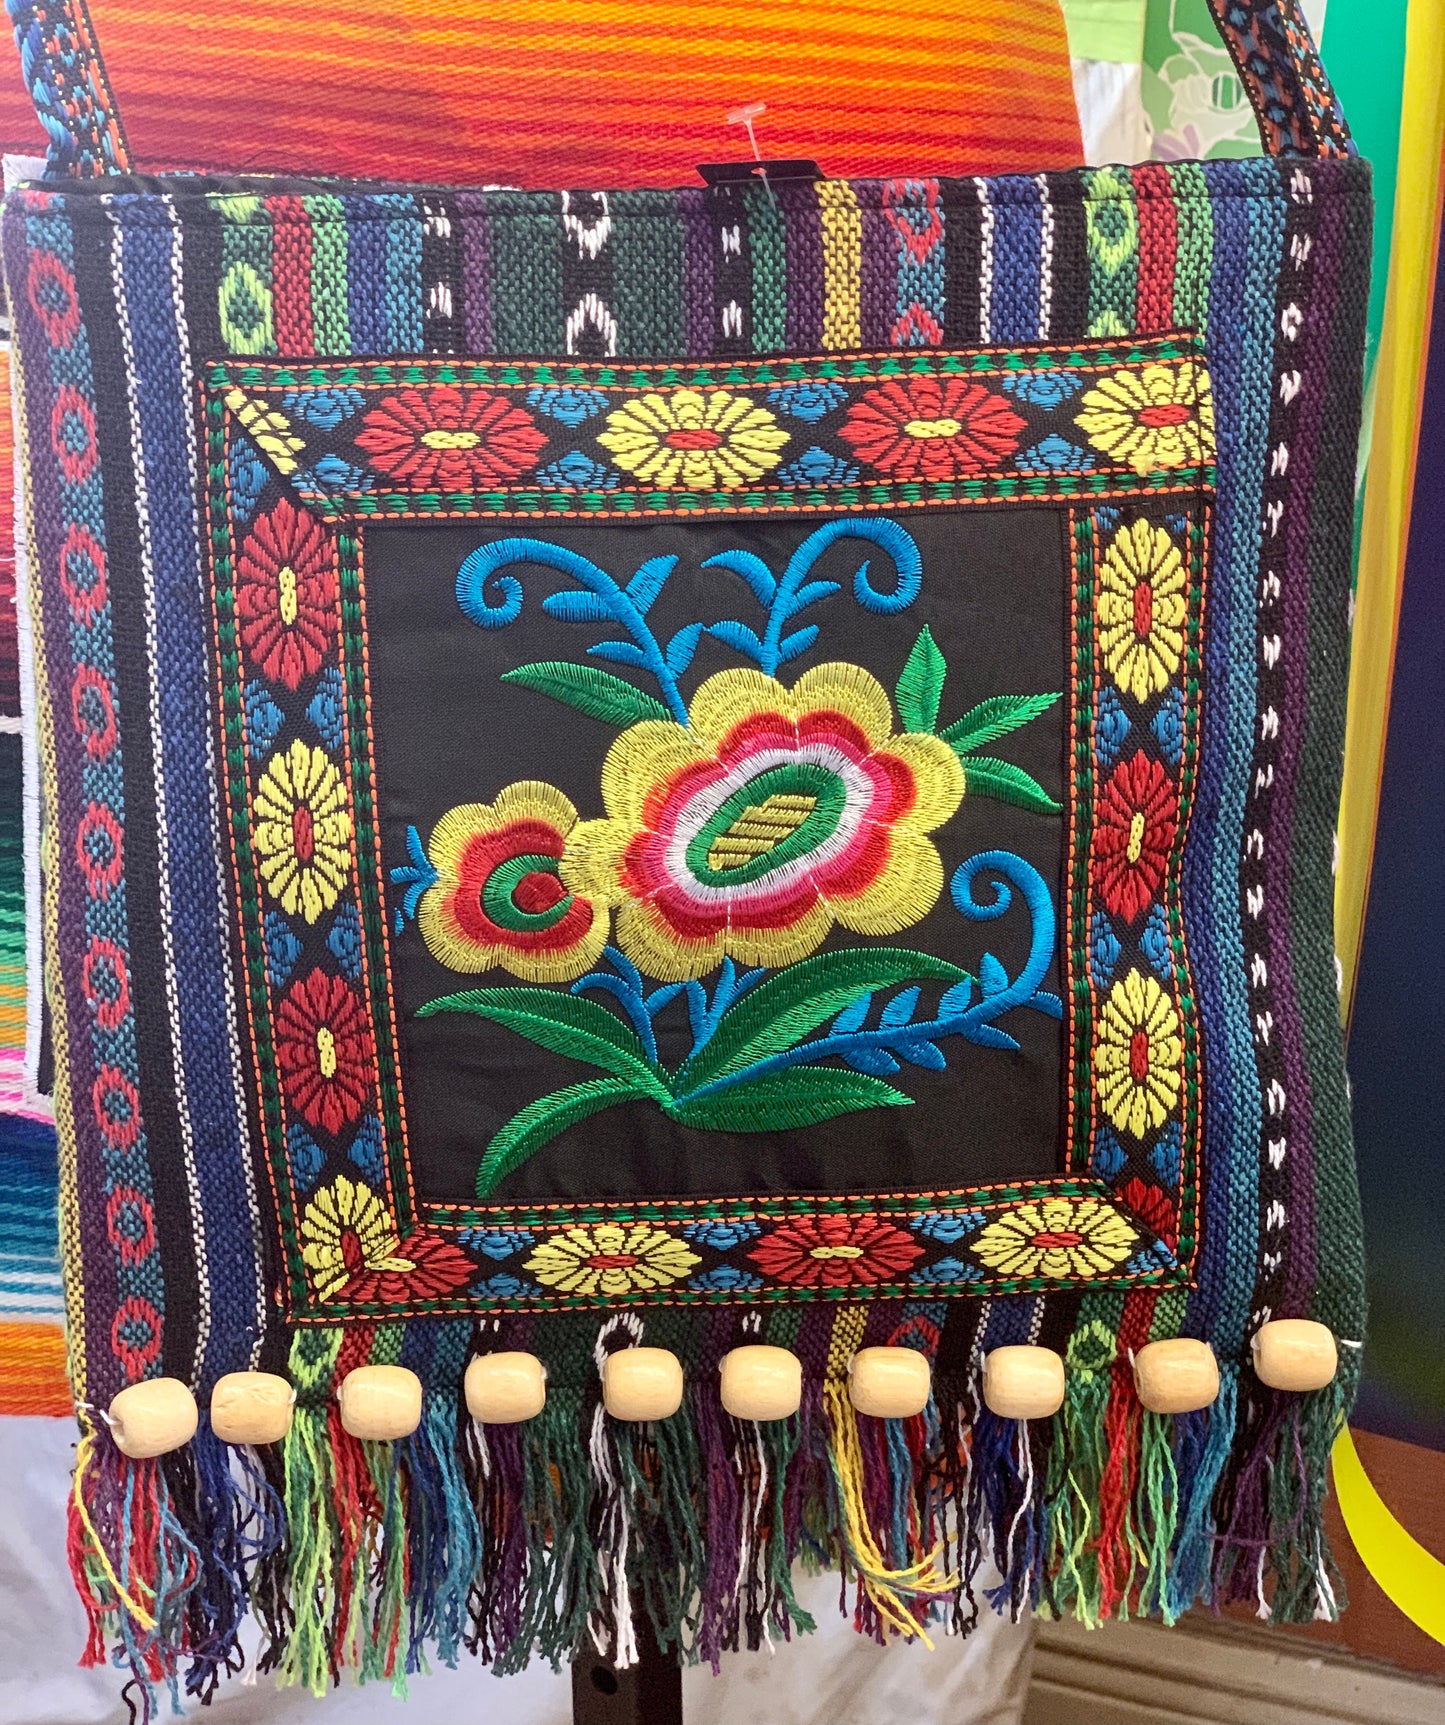 Southwest Embroidered Bag With Beads